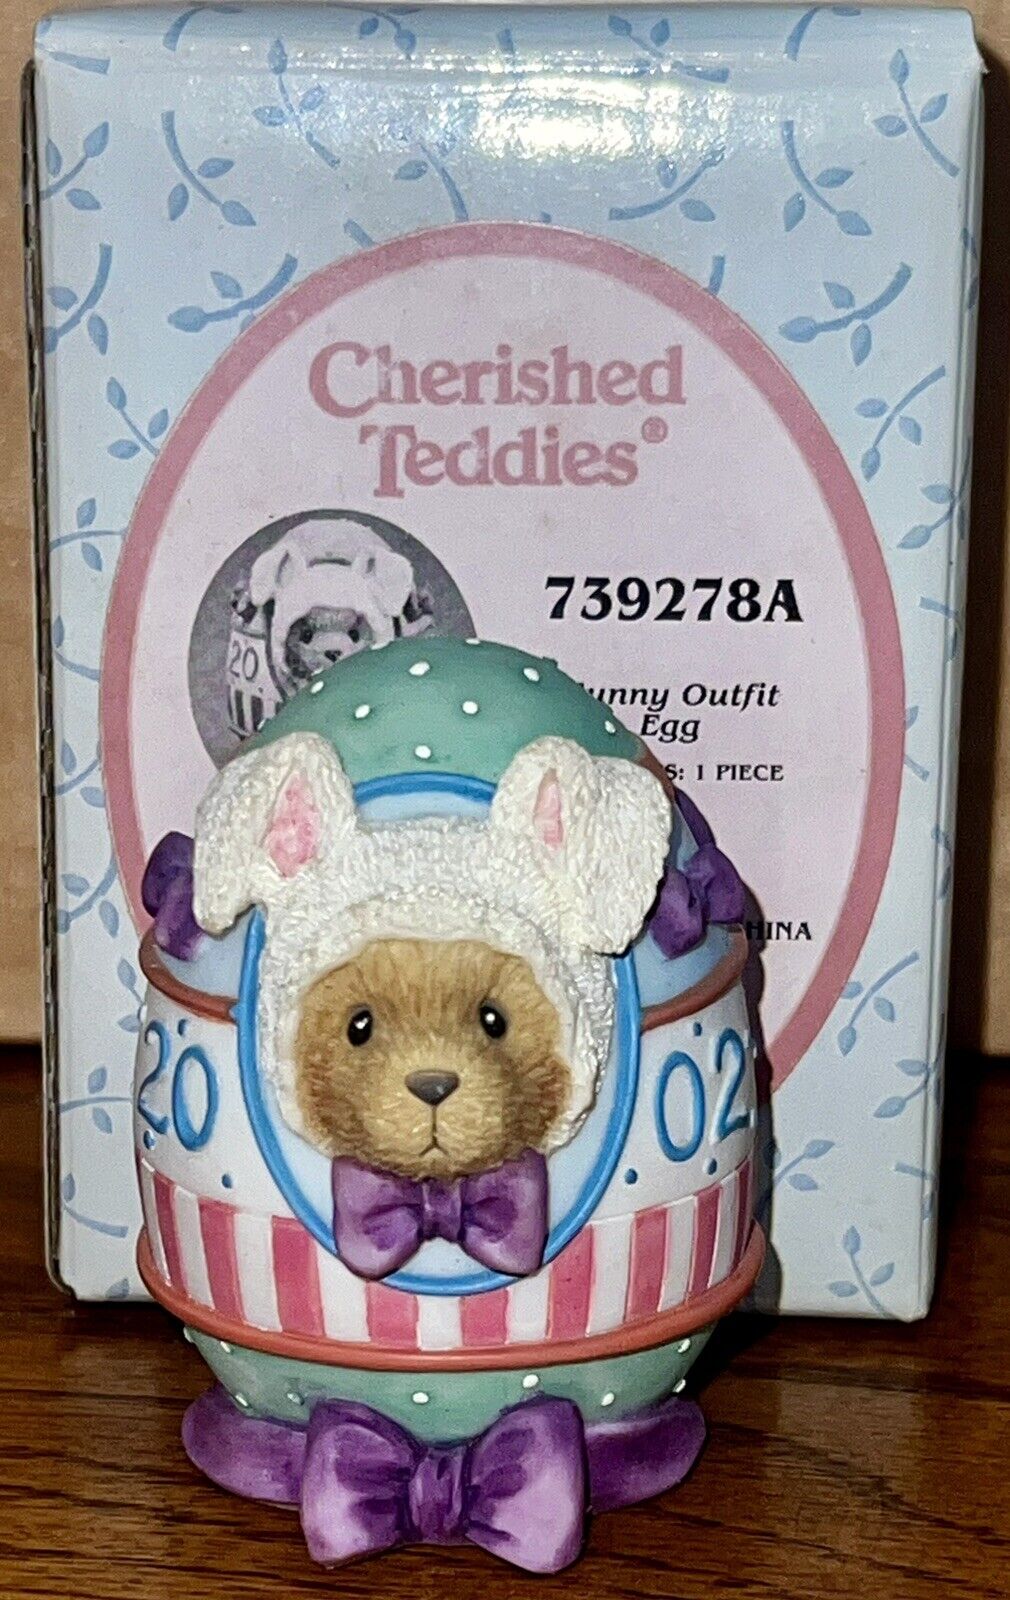 RARE VTG Cherished Teddies Bunny Outfit Egg Dated 2002 #739278A NEW UNDISPLAYED